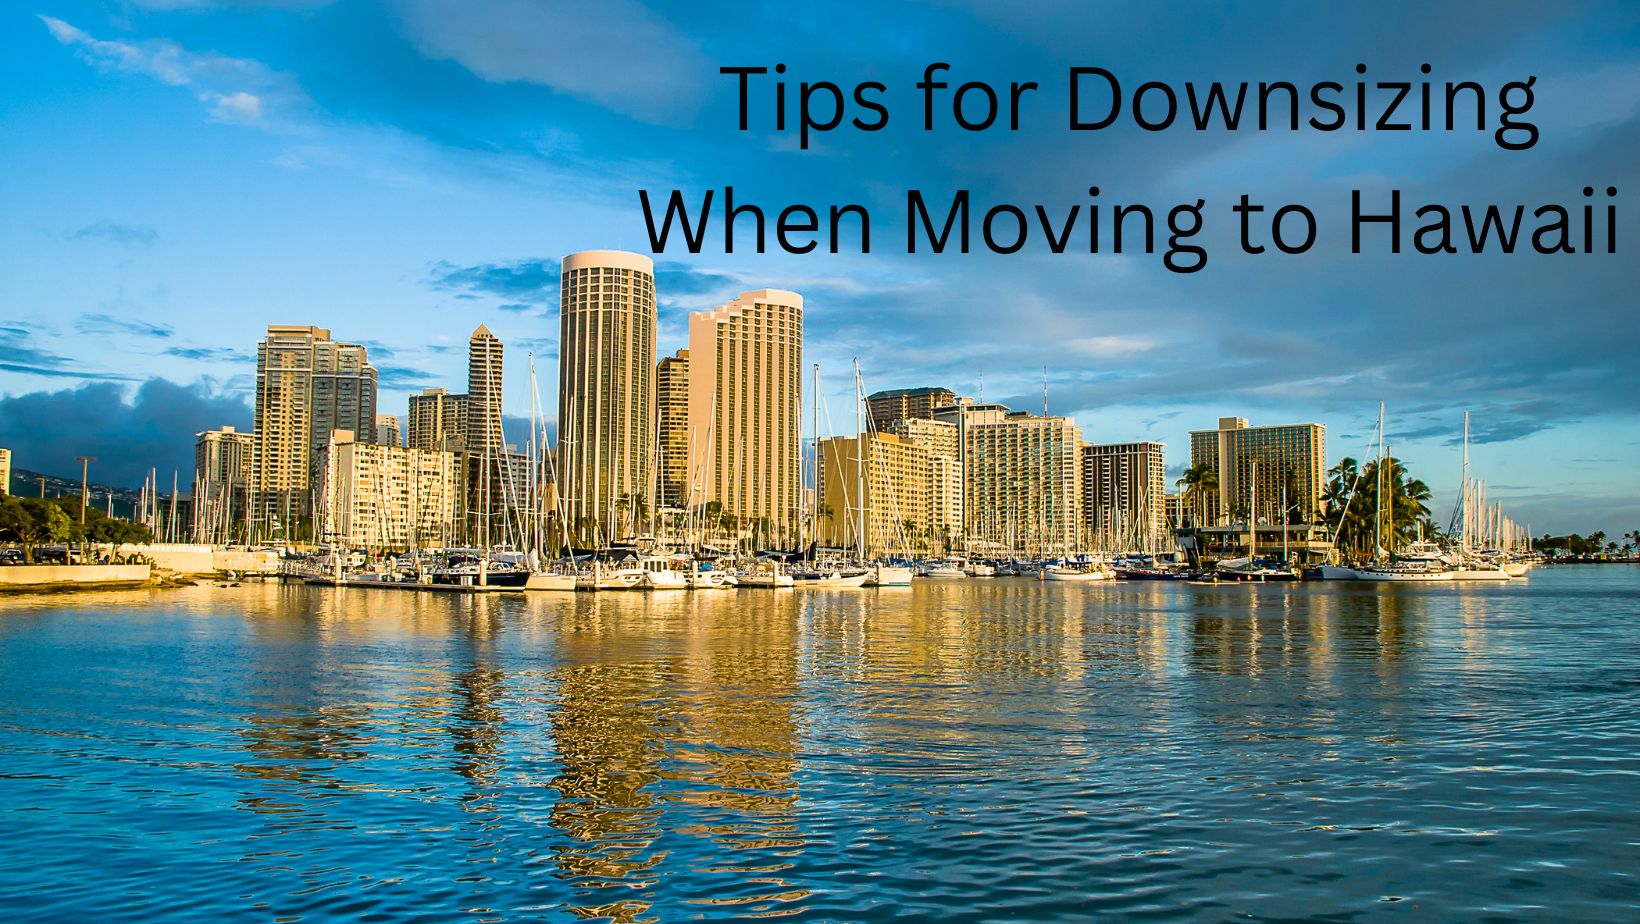 Tips for Downsizing When Moving to Hawaii